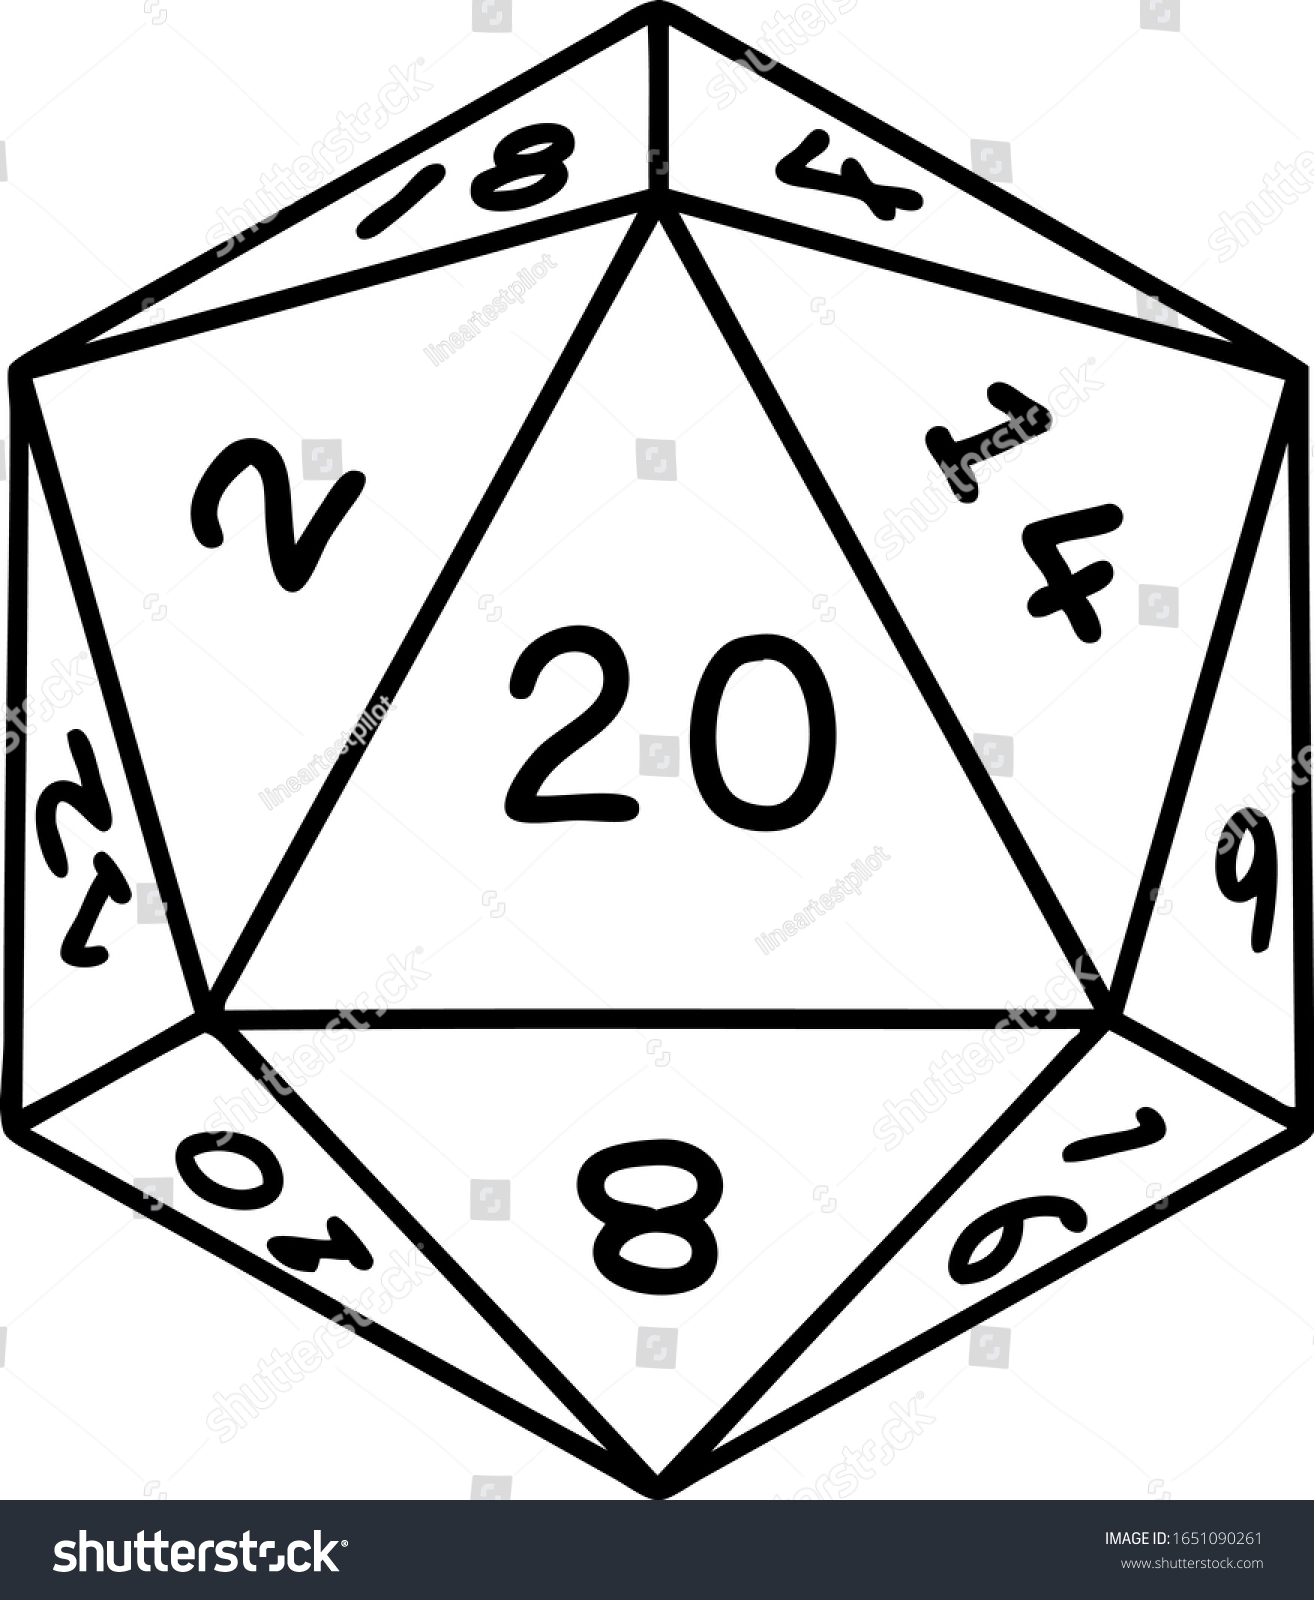 SVG of tattoo in black line style of a d20 dice svg